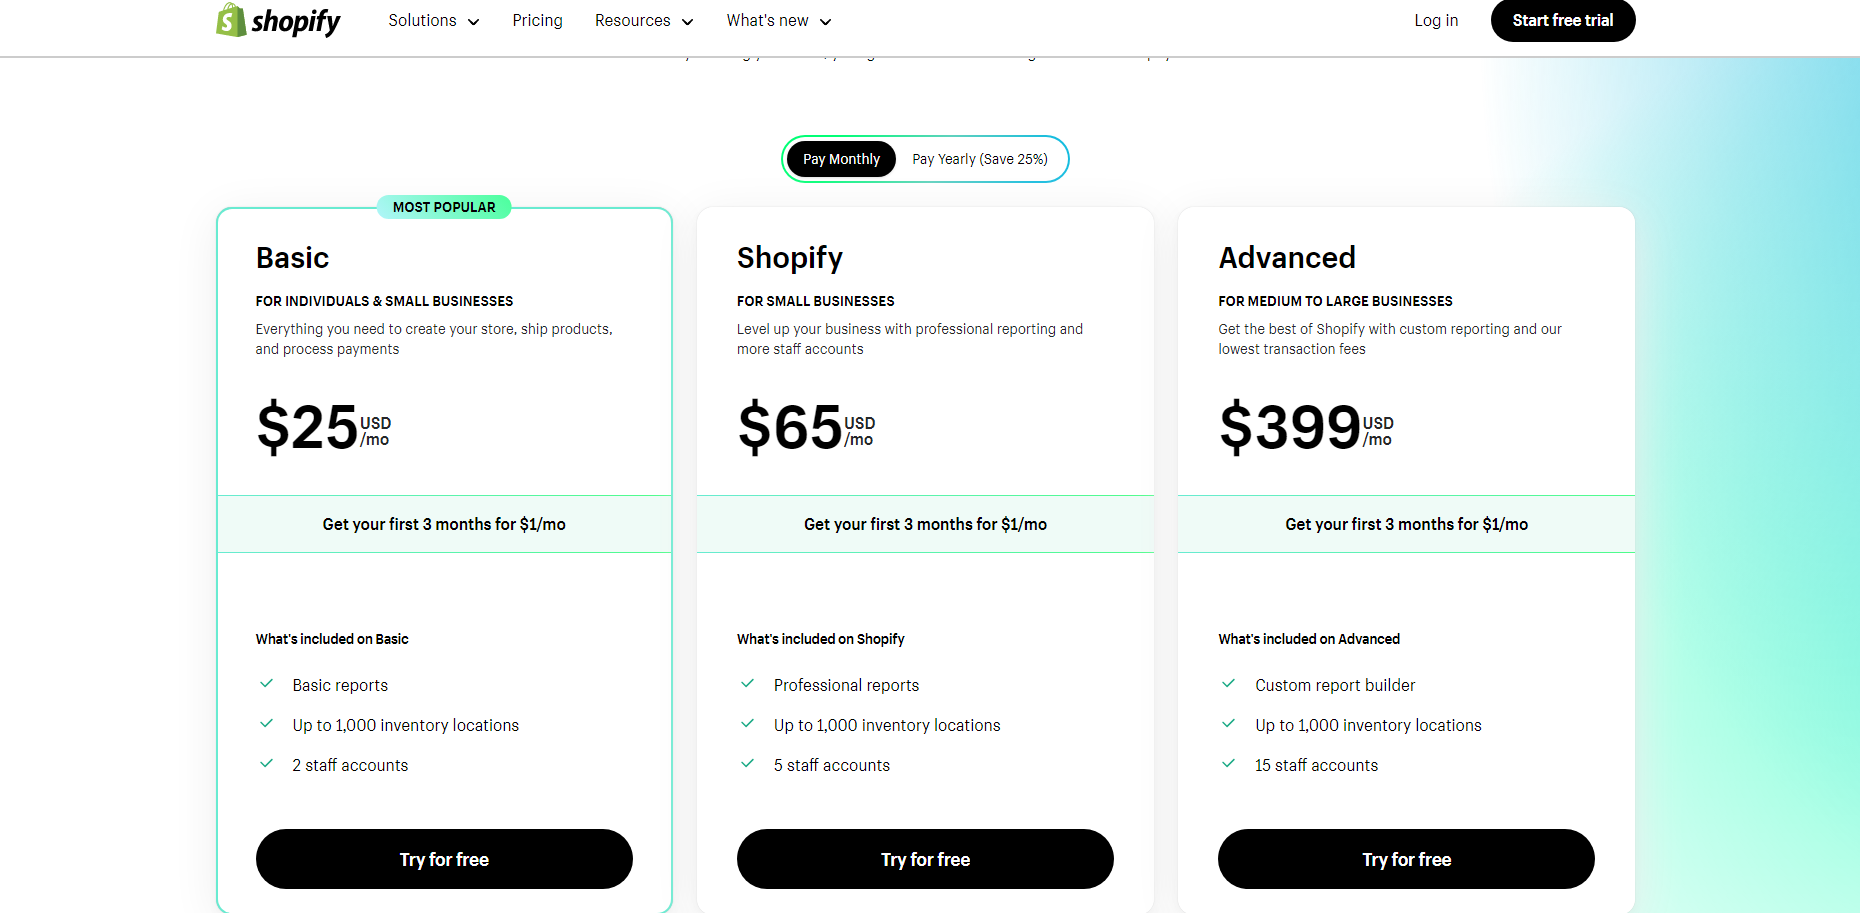 What are the available pricing plans in Shopify?